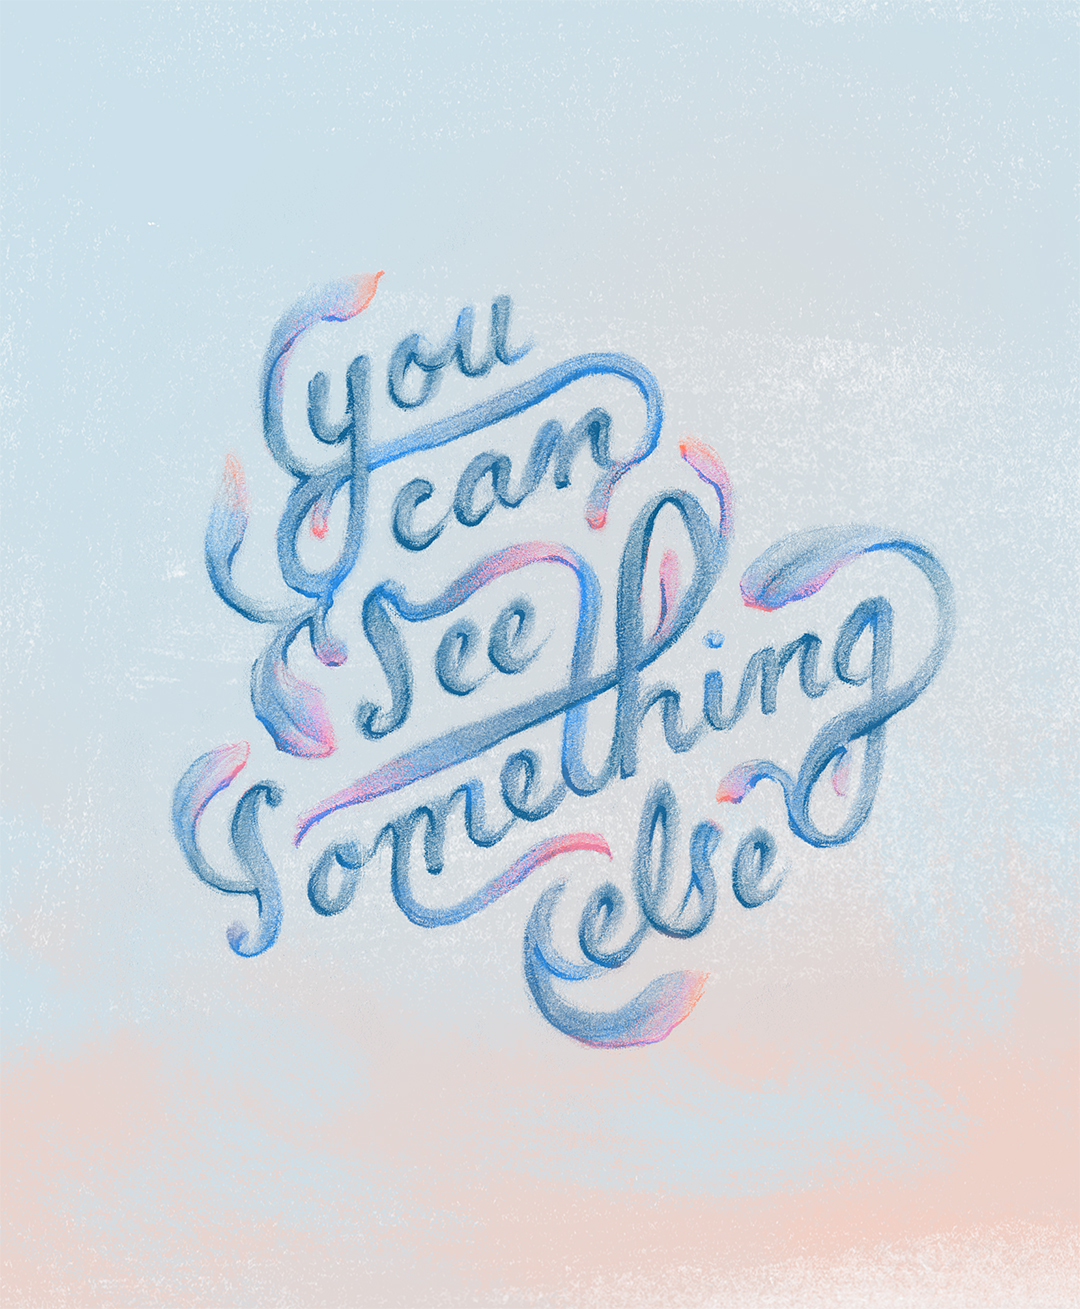 "You can see something else," colored illustrated lettering by Laura Dreyer. Lyrics by Sara Groves.